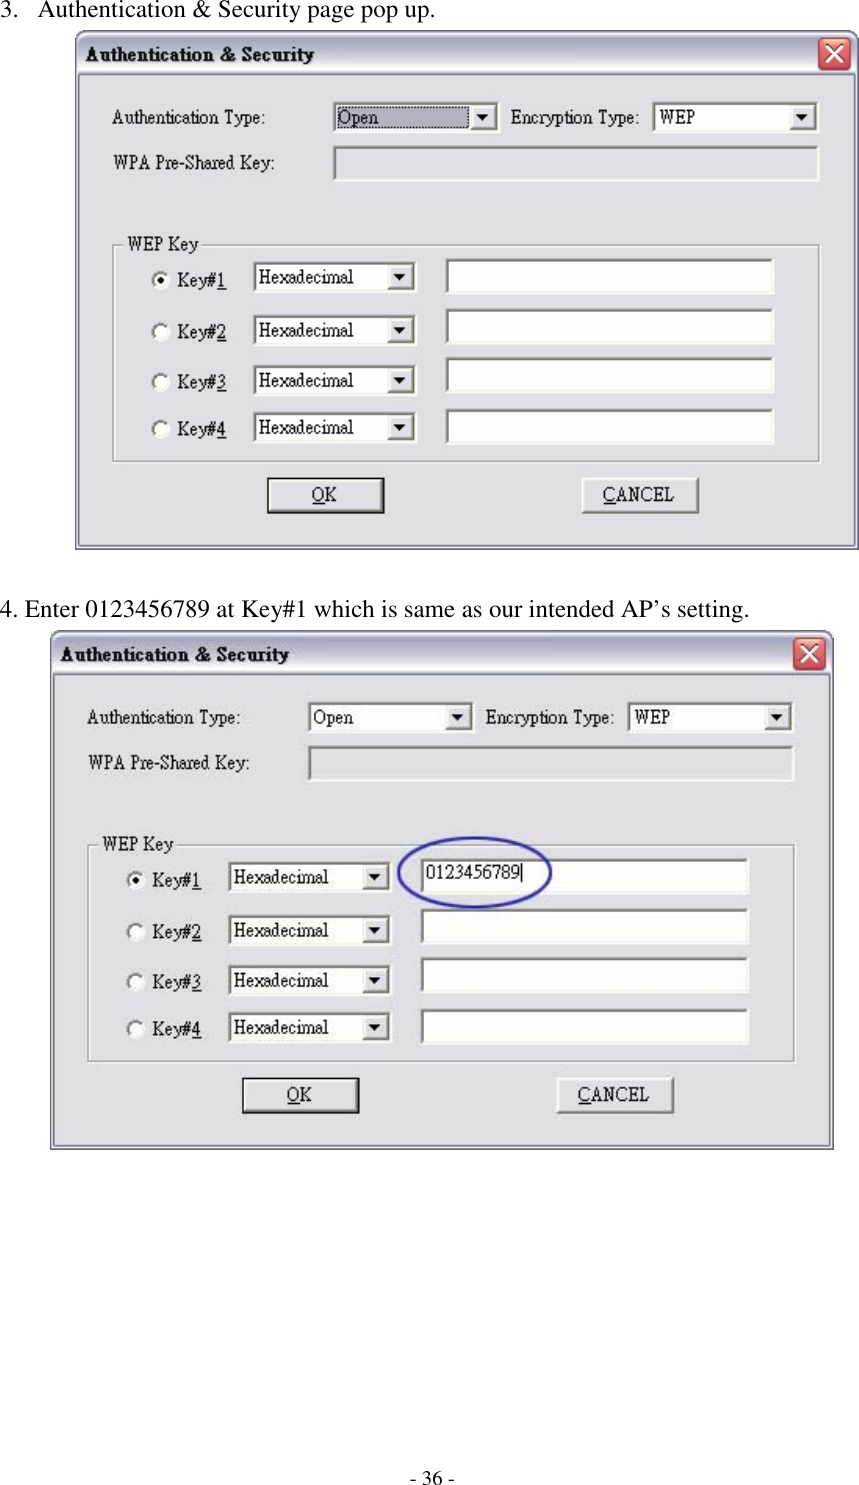    - 36 - 3. Authentication &amp; Security page pop up.   4. Enter 0123456789 at Key#1 which is same as our intended AP’s setting.         